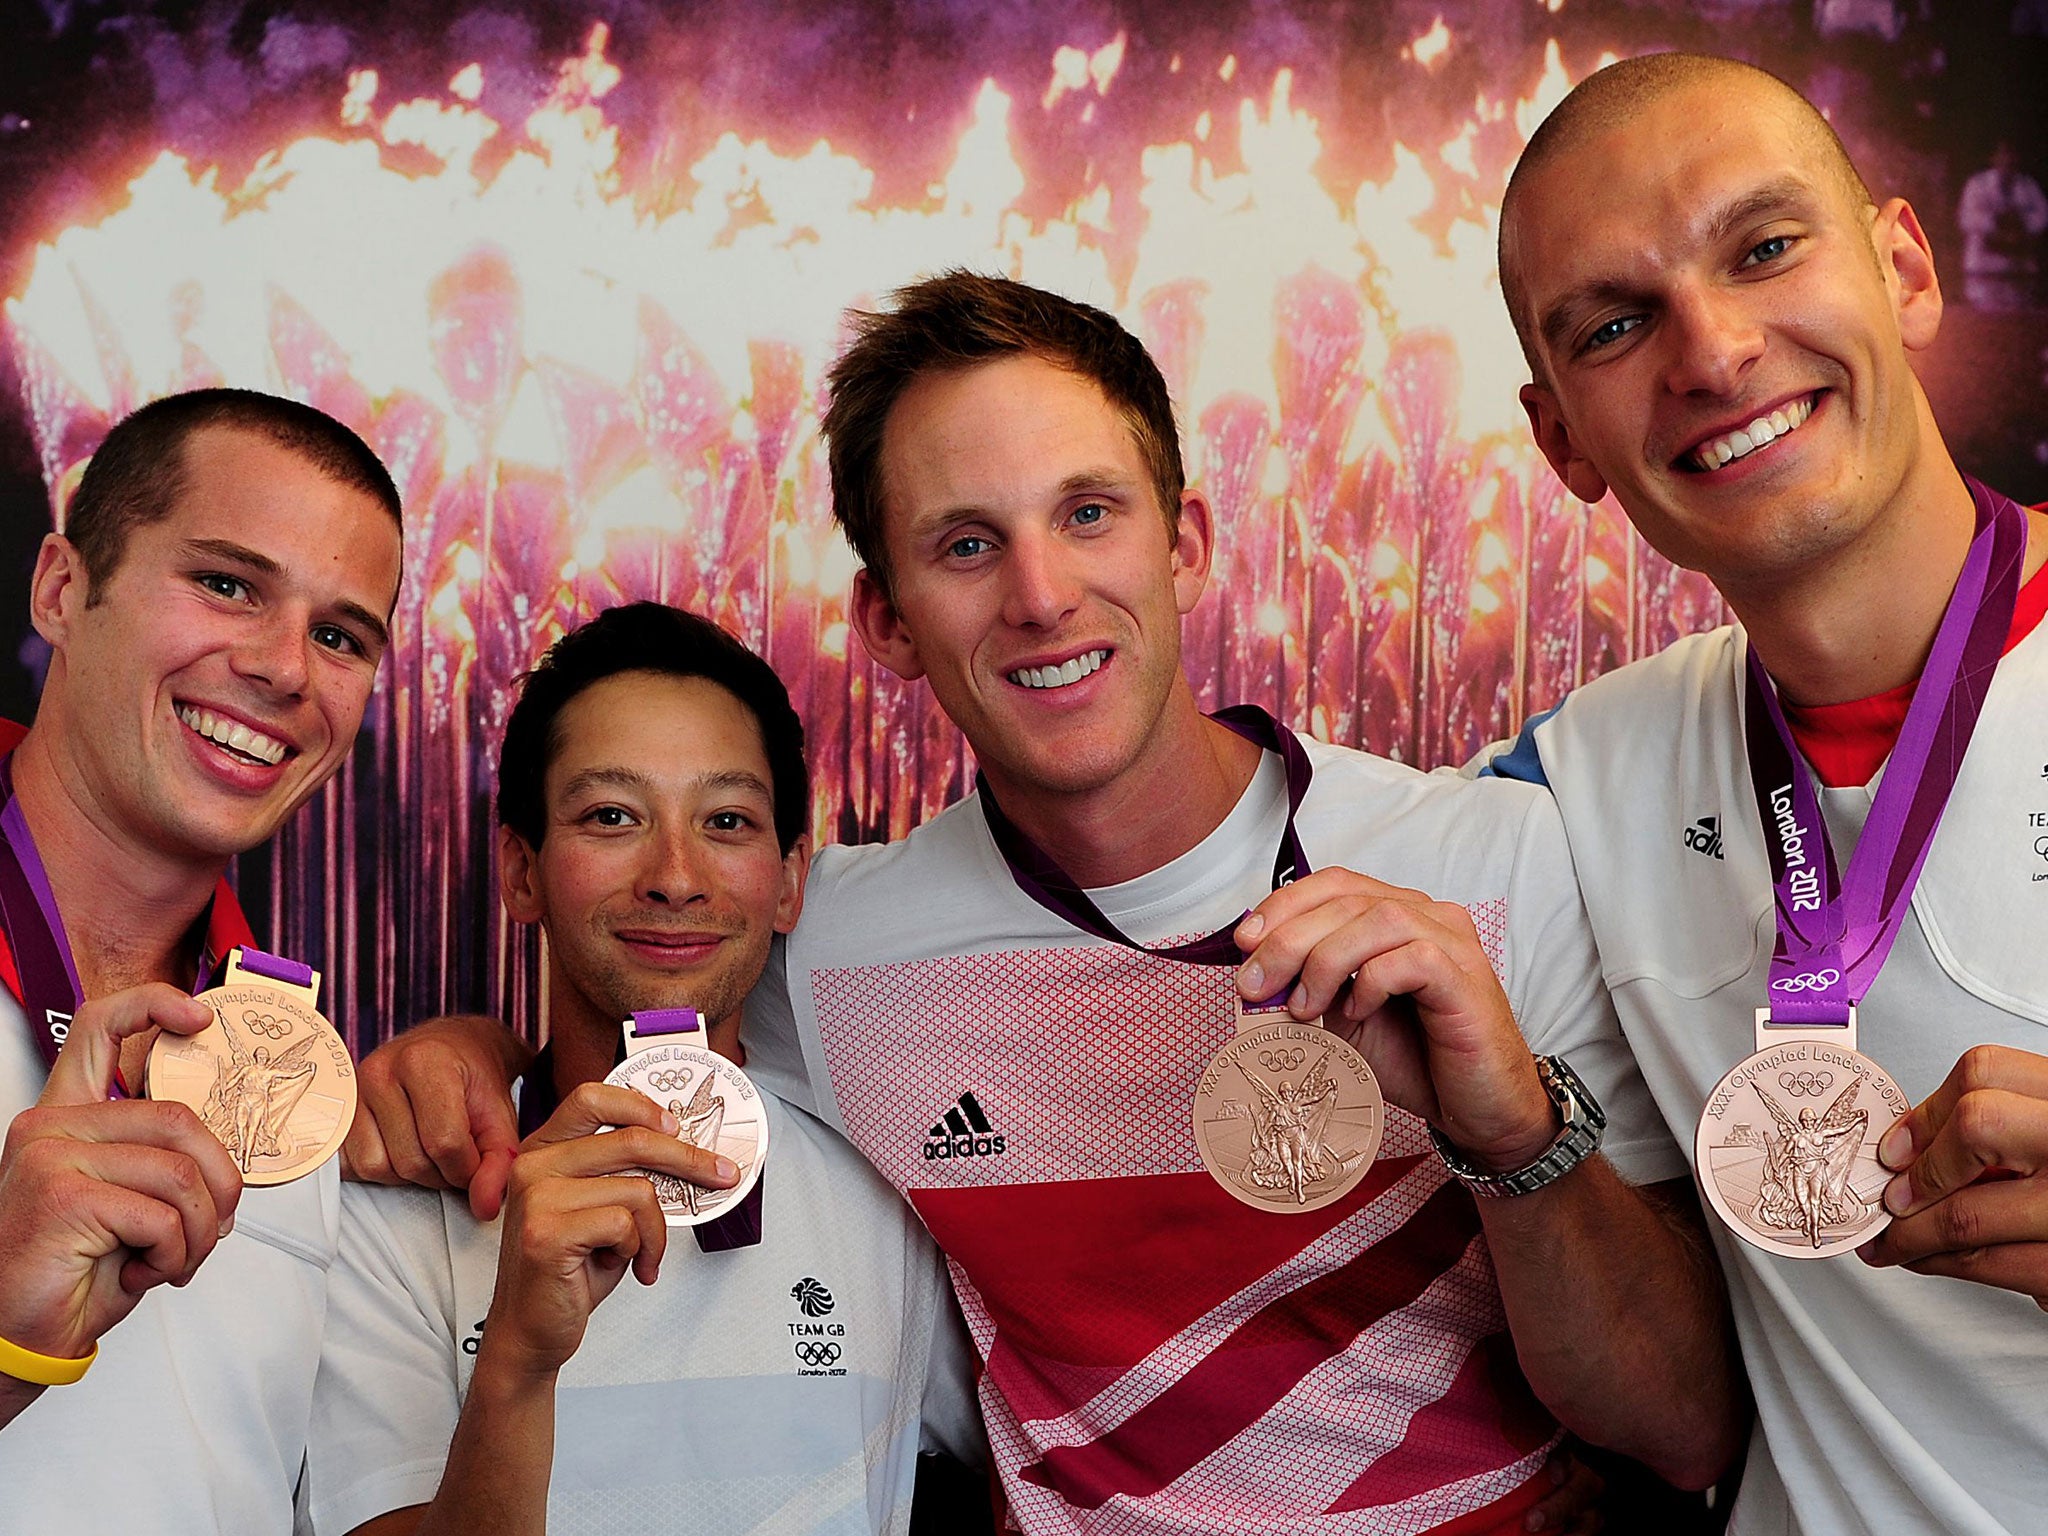 London 2012 Olympic Games - Team GB Rowers, left to right: James Foad, Phelan Hill, Matt Langridge and Moe Sbihi with their bronze medals